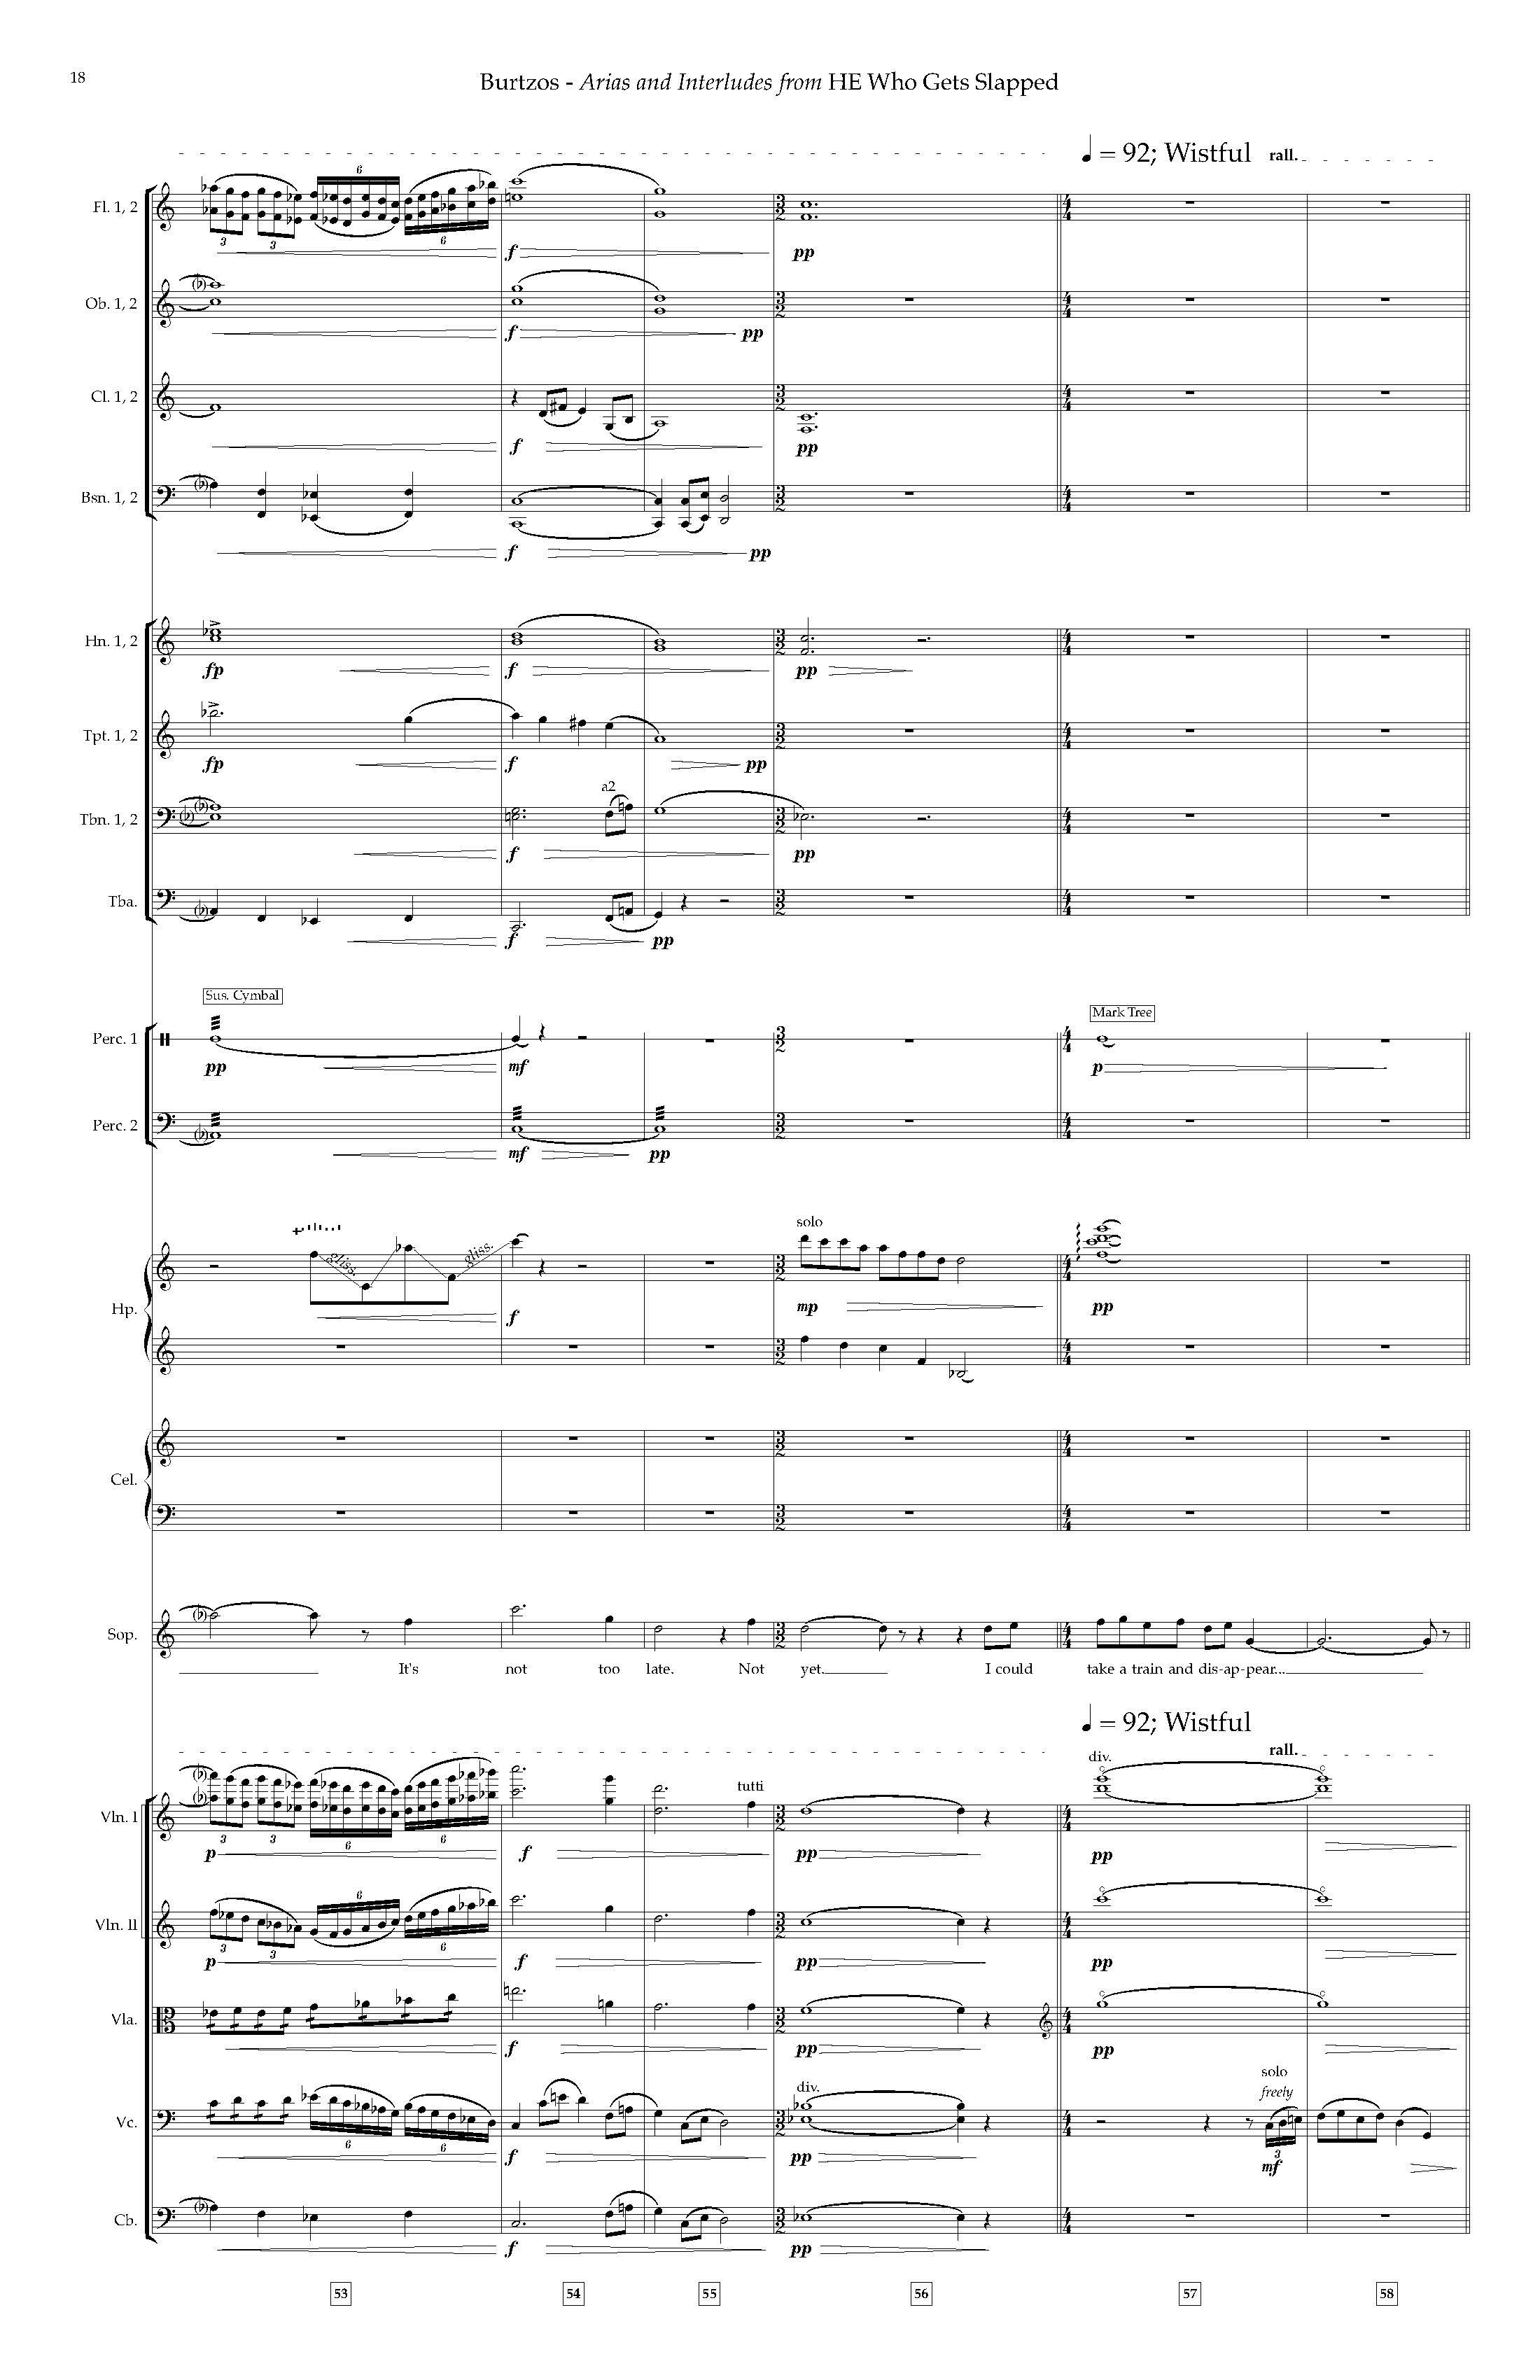 Arias and Interludes from HWGS - Complete Score_Page_24.jpg